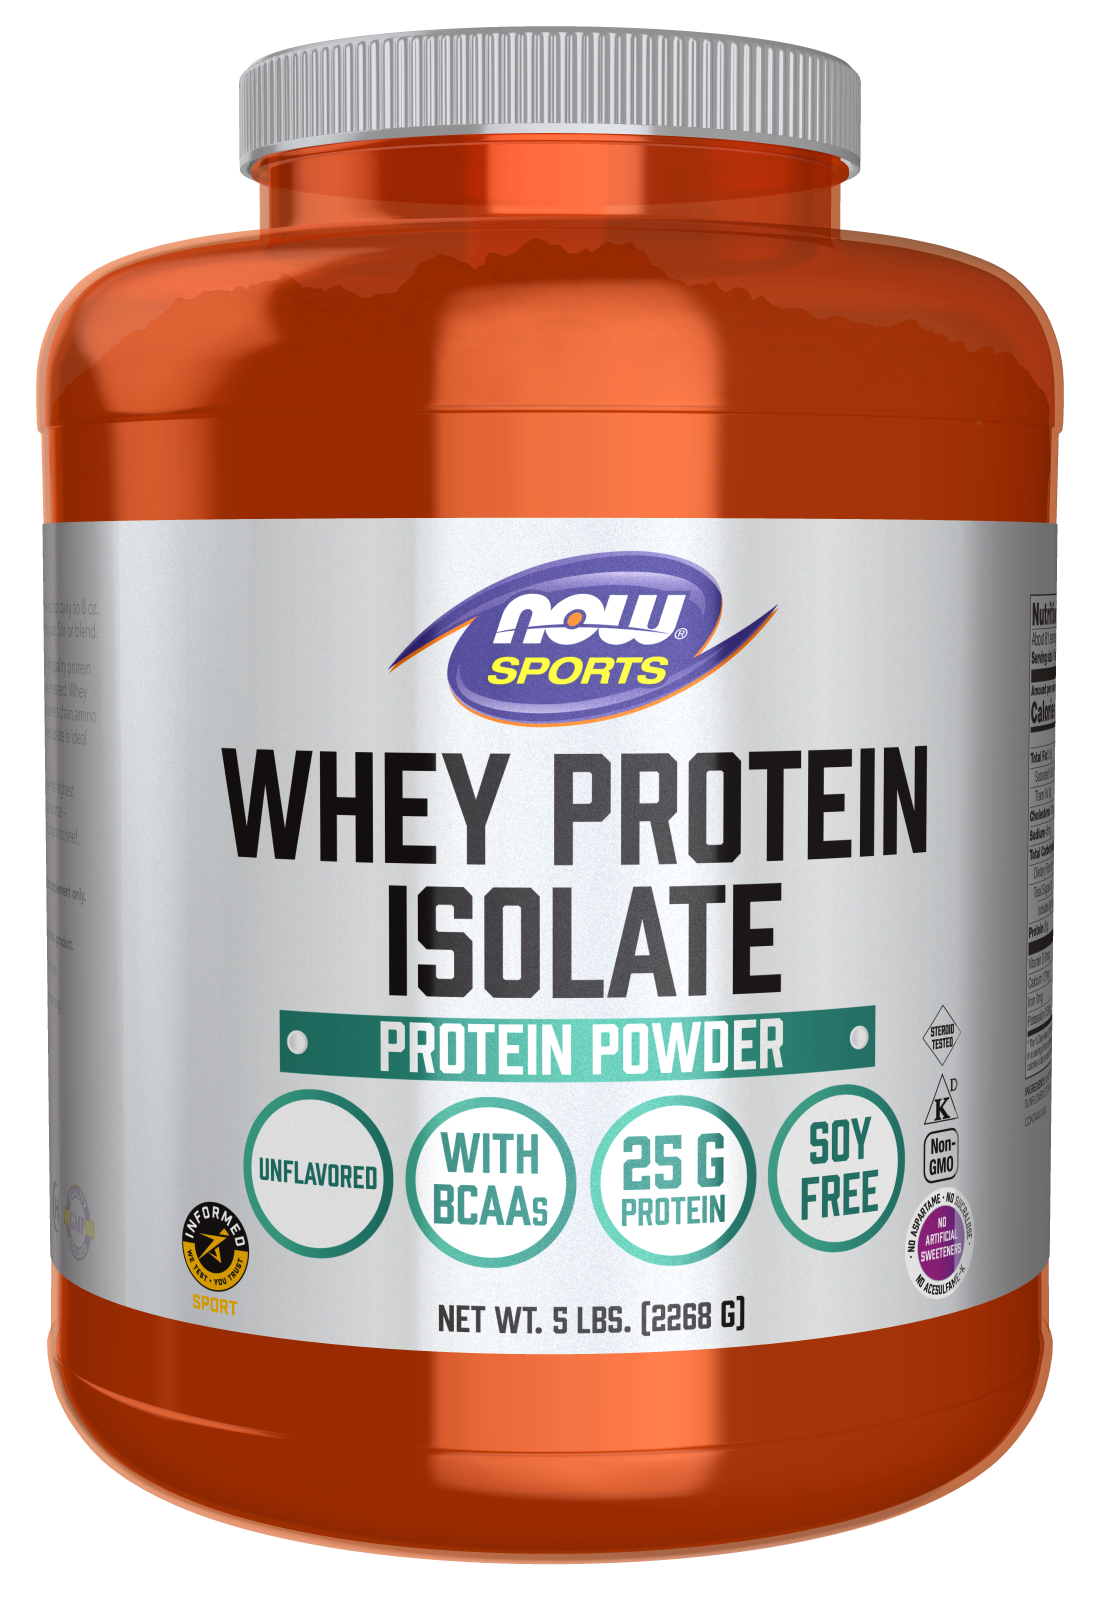 Whey Protein Isolate, Unflavored Powder - 5 lbs. Bottle Front